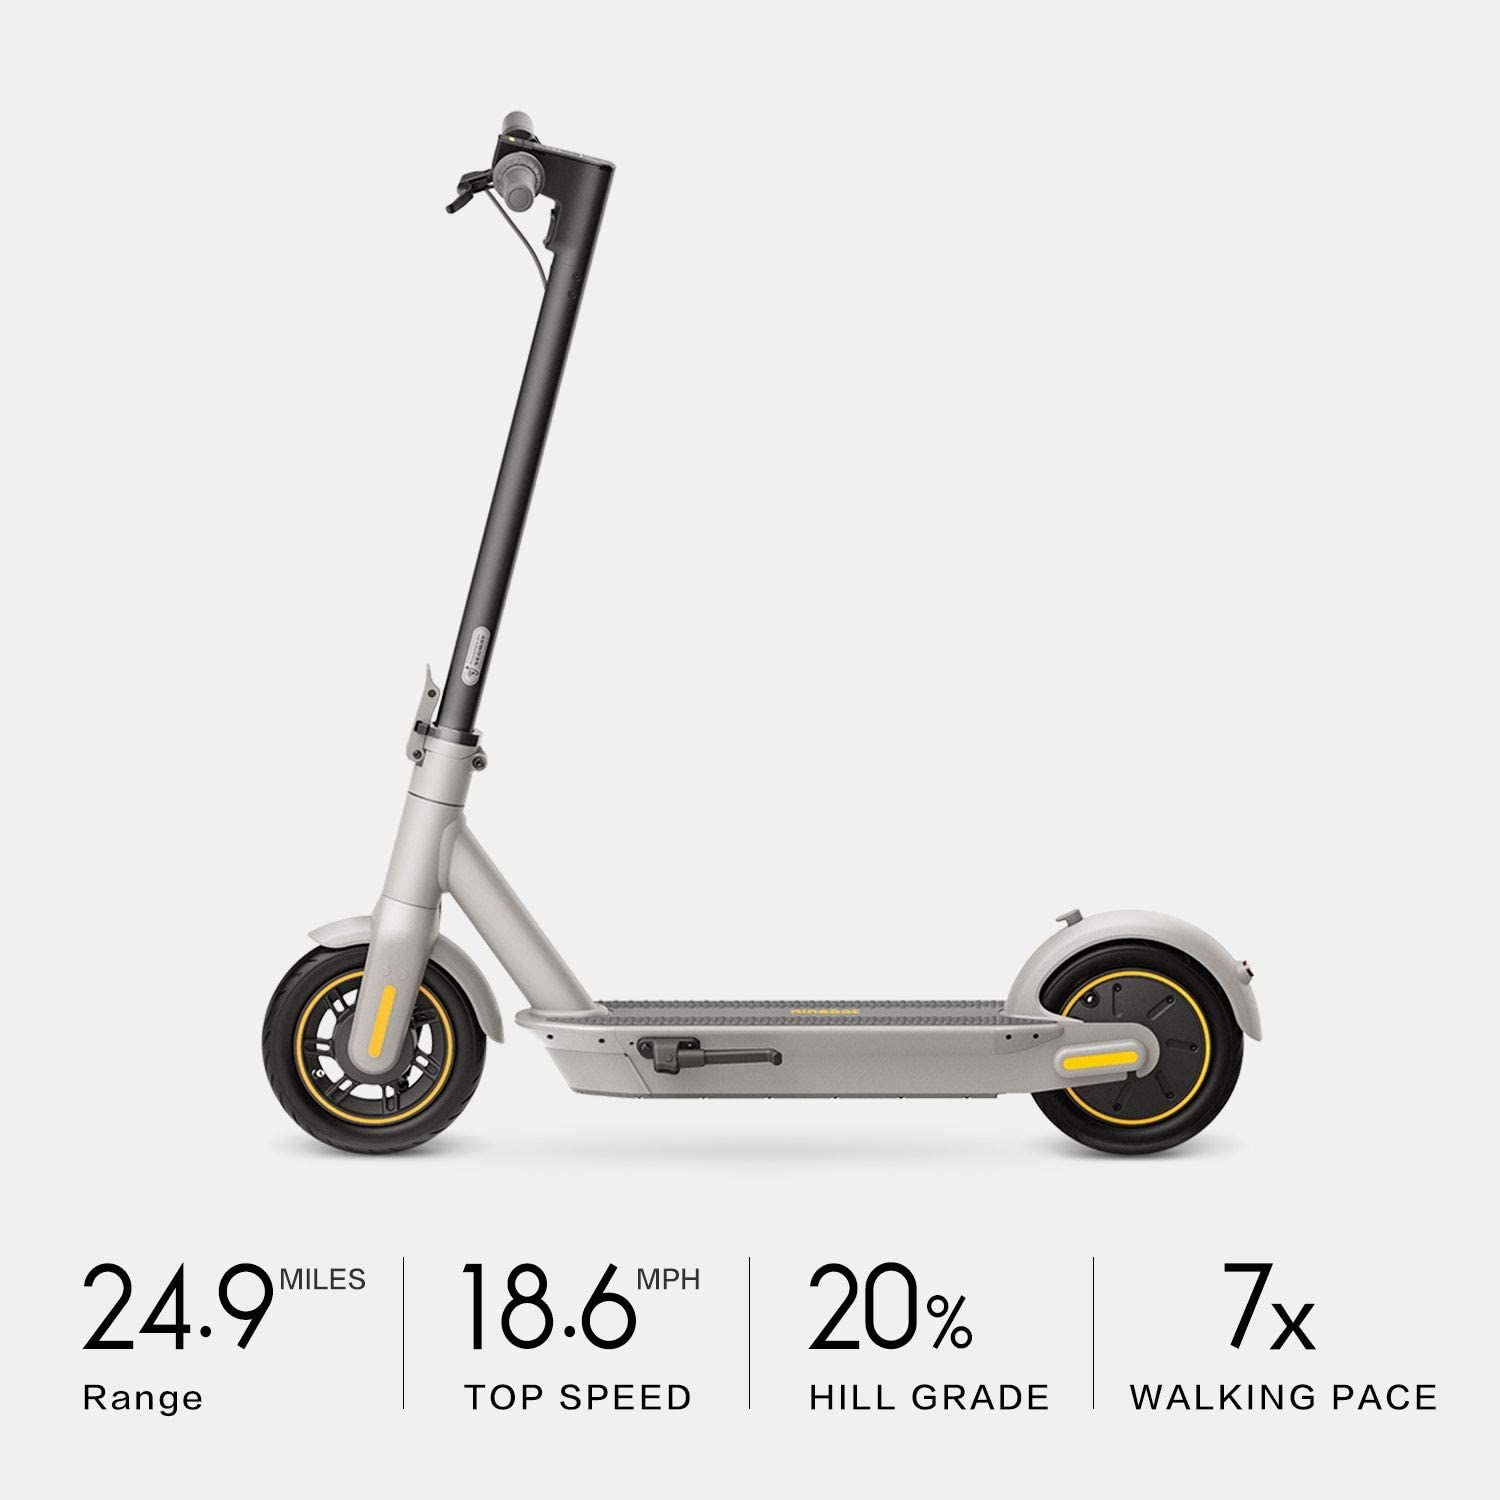 Segway Ninebot MAX features